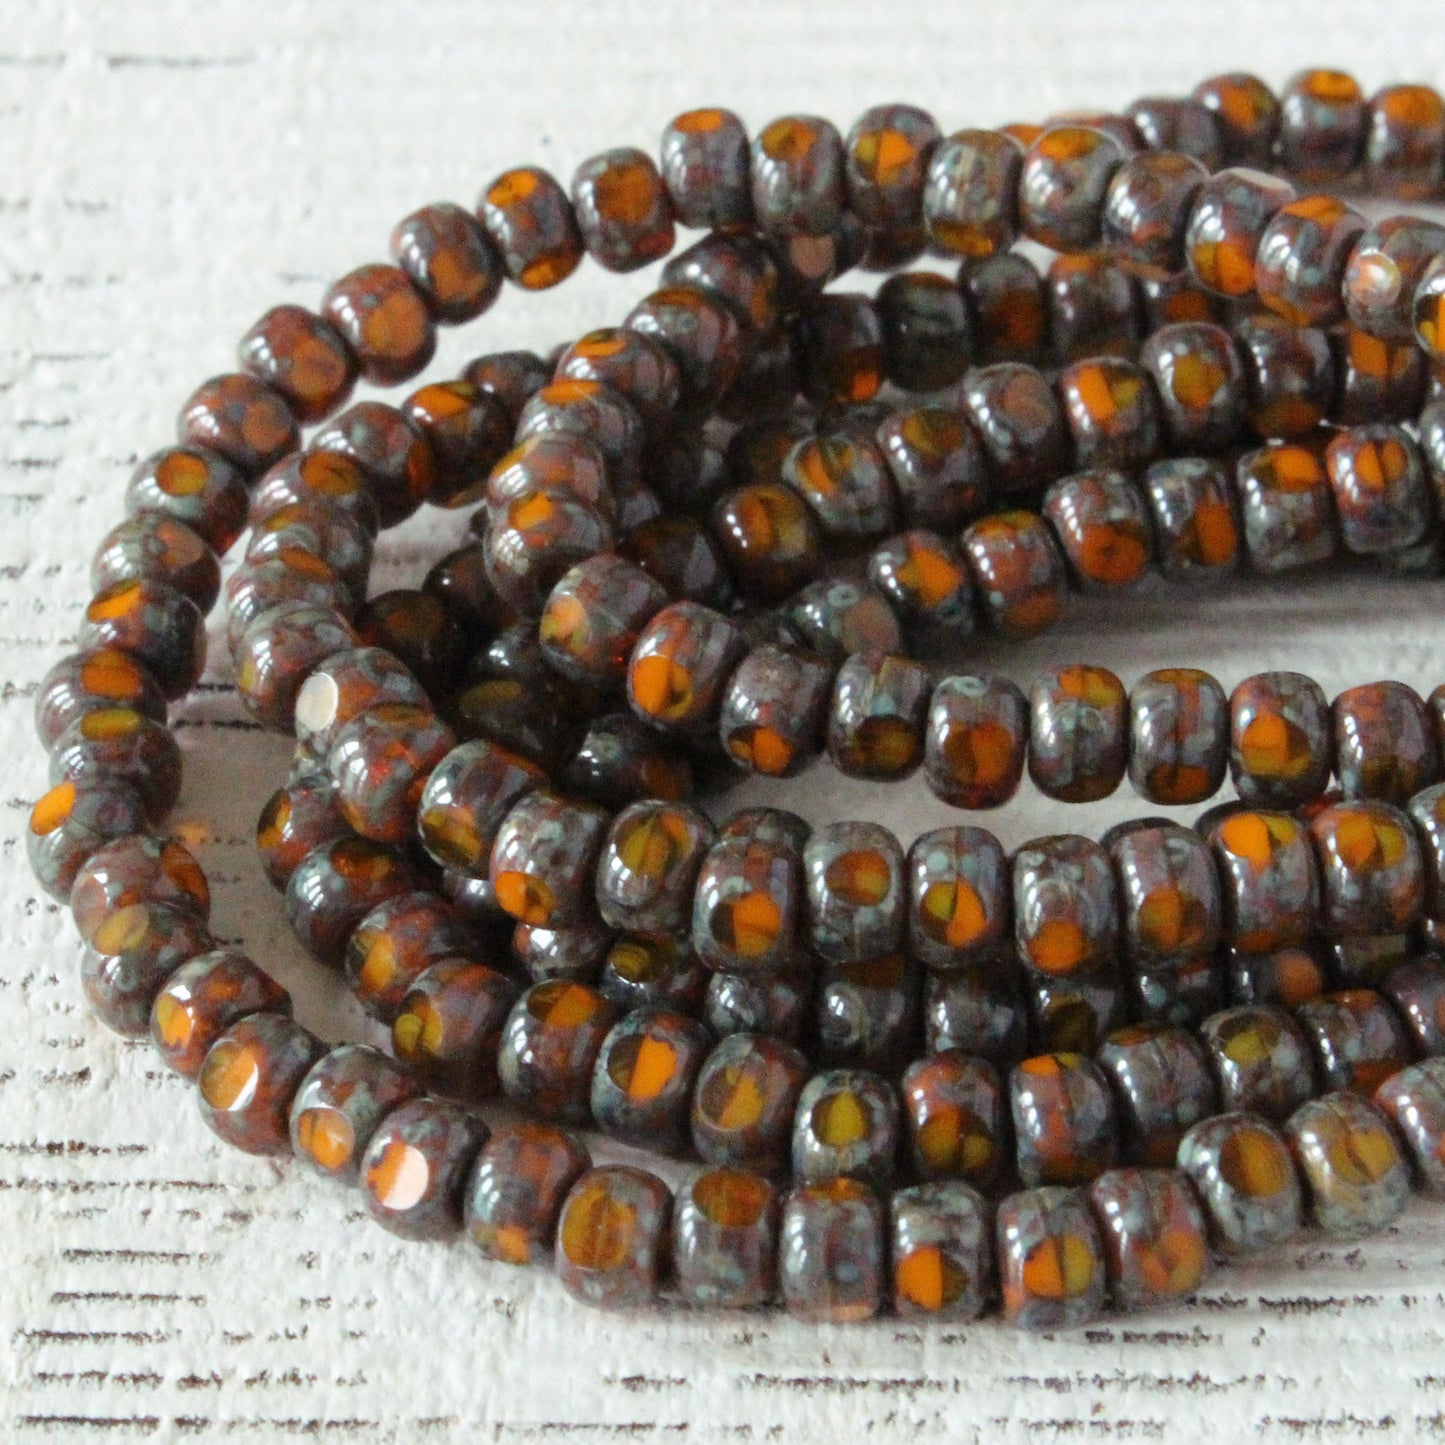 Size 6/0 Tri-Cut Picasso Seed Beads - Ochre - 50 beads